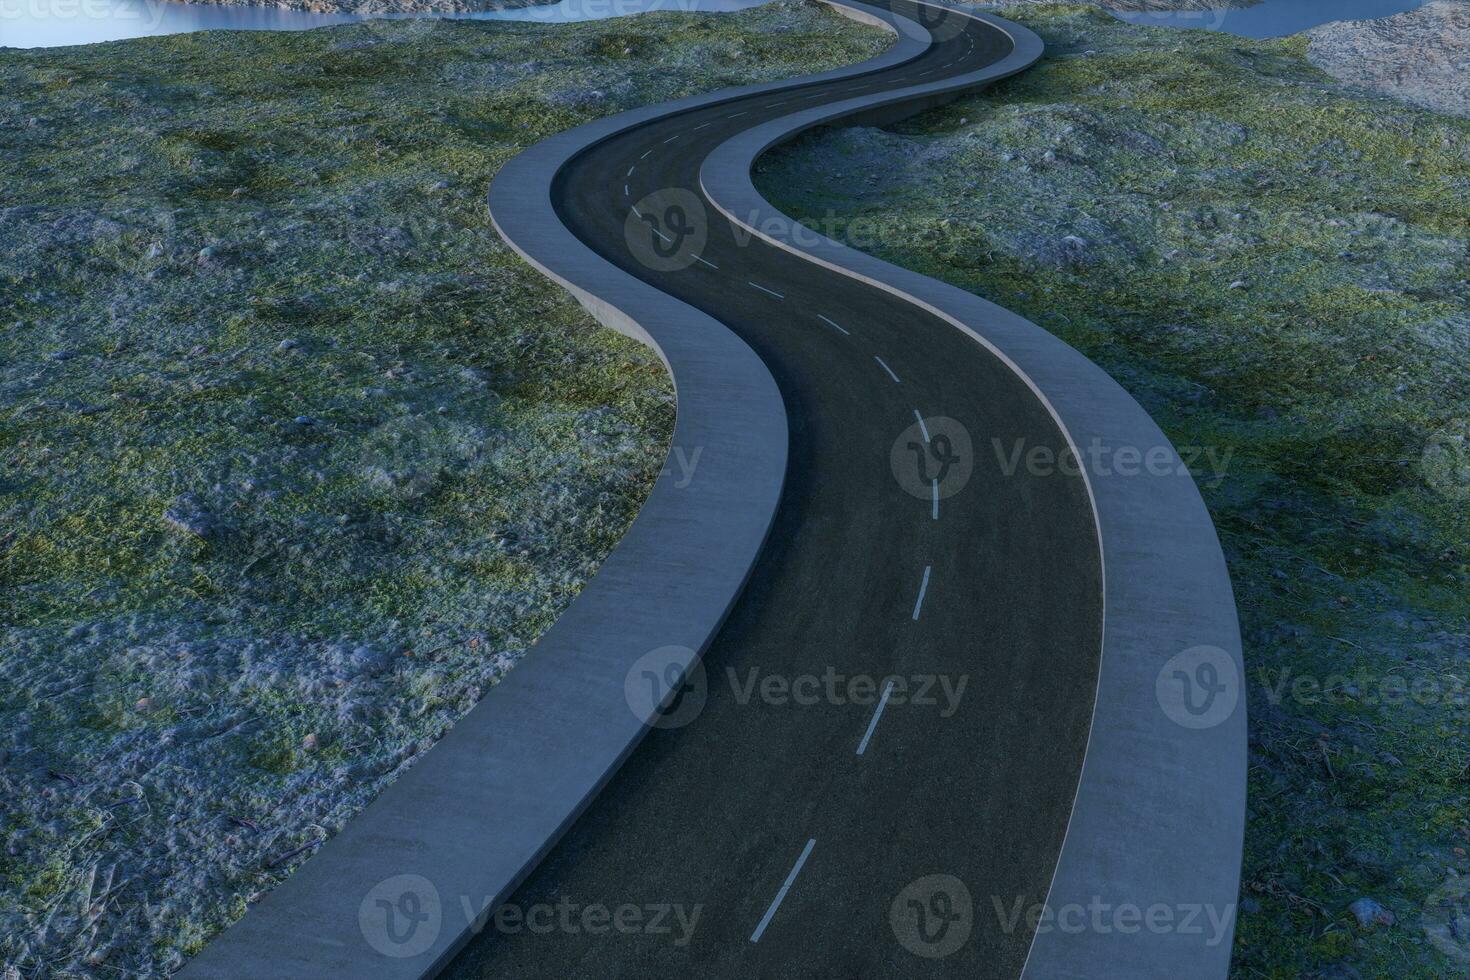 The waving road in the deserted suburbs, 3d rendering photo